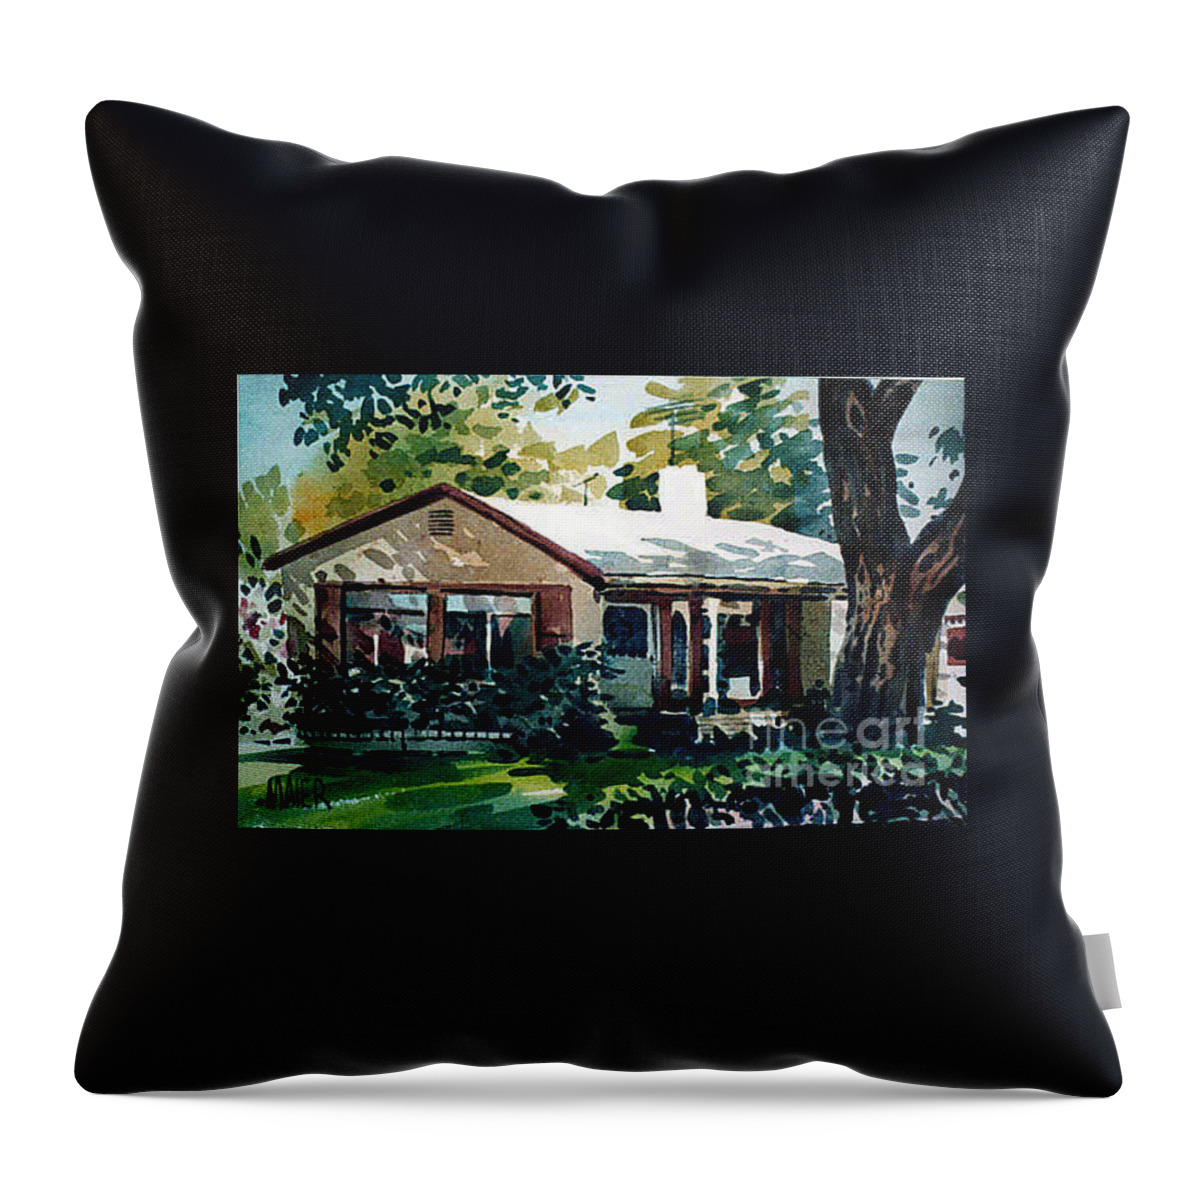 Commission Throw Pillow featuring the painting Redwood City House #1 by Donald Maier